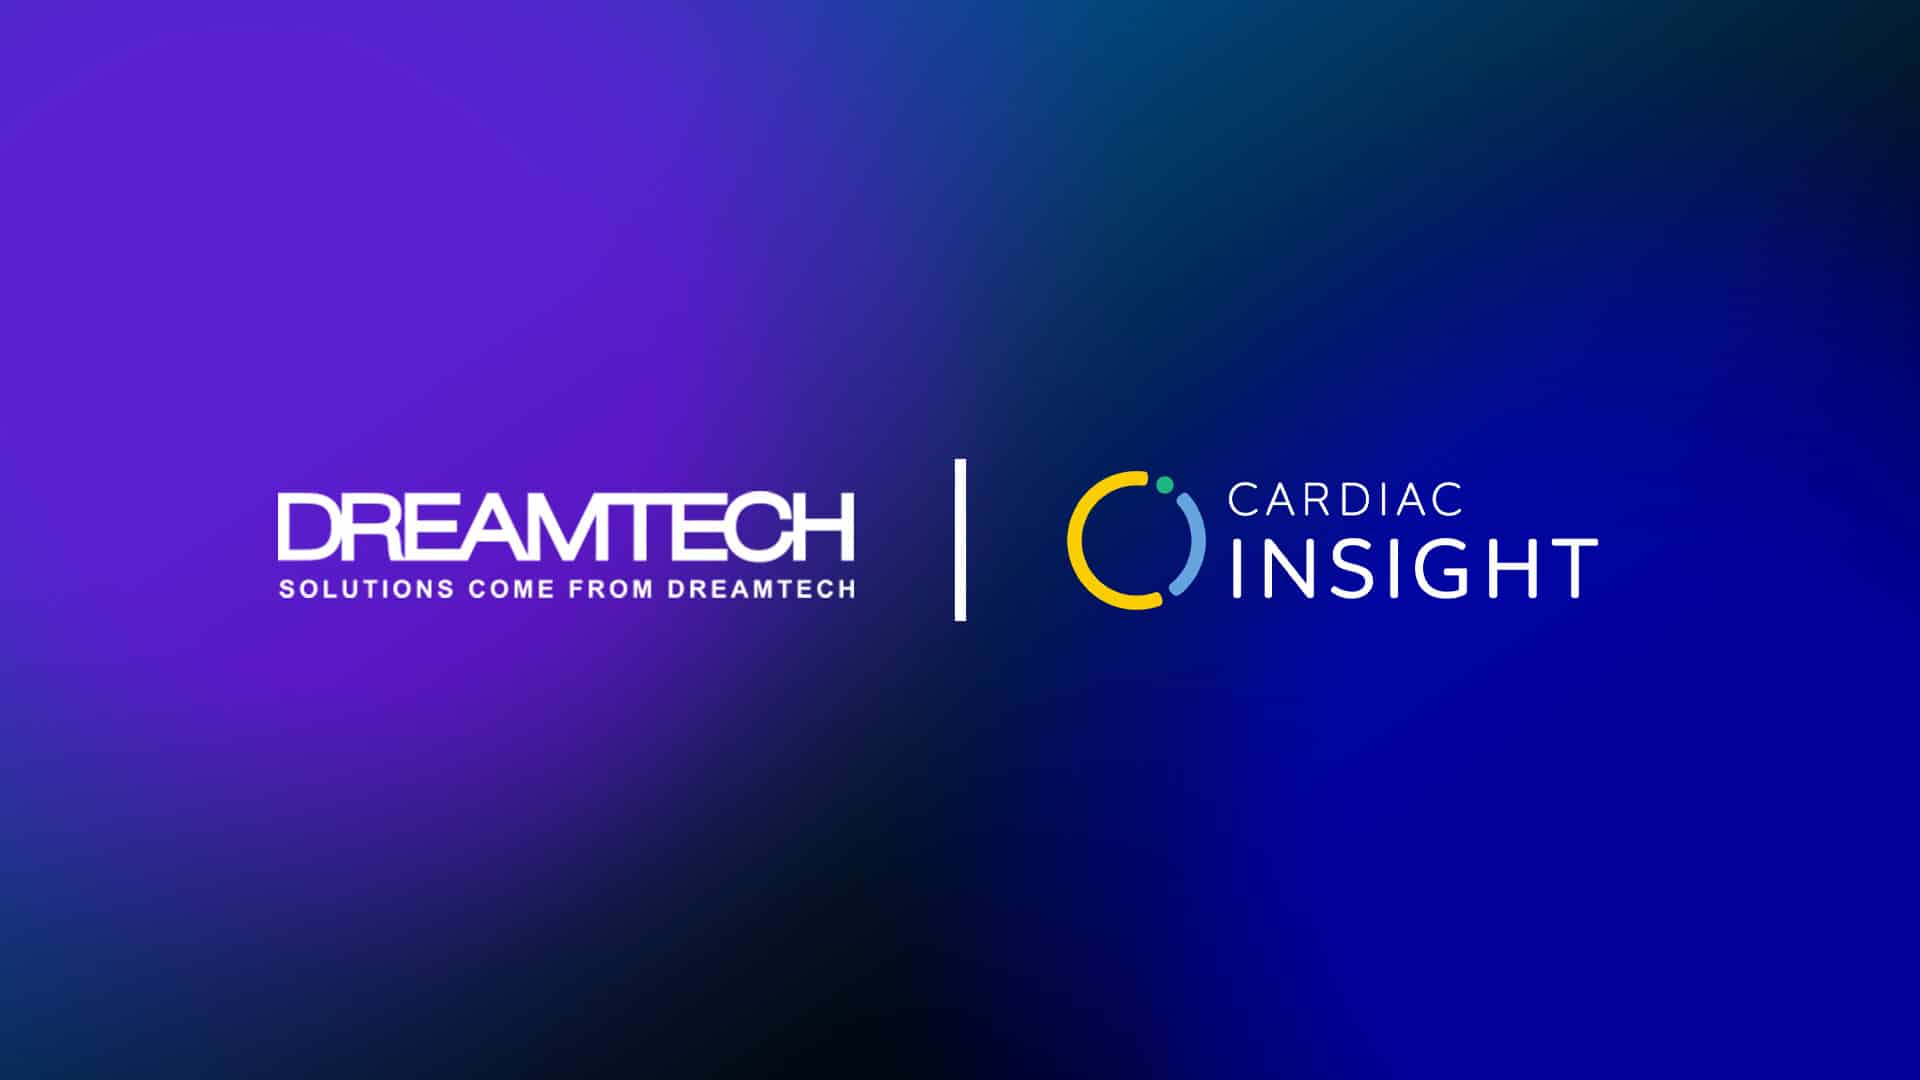 Dreamtech Acquires Cardiac Insight, A Strategic Move to Expand into the Heart Health Market